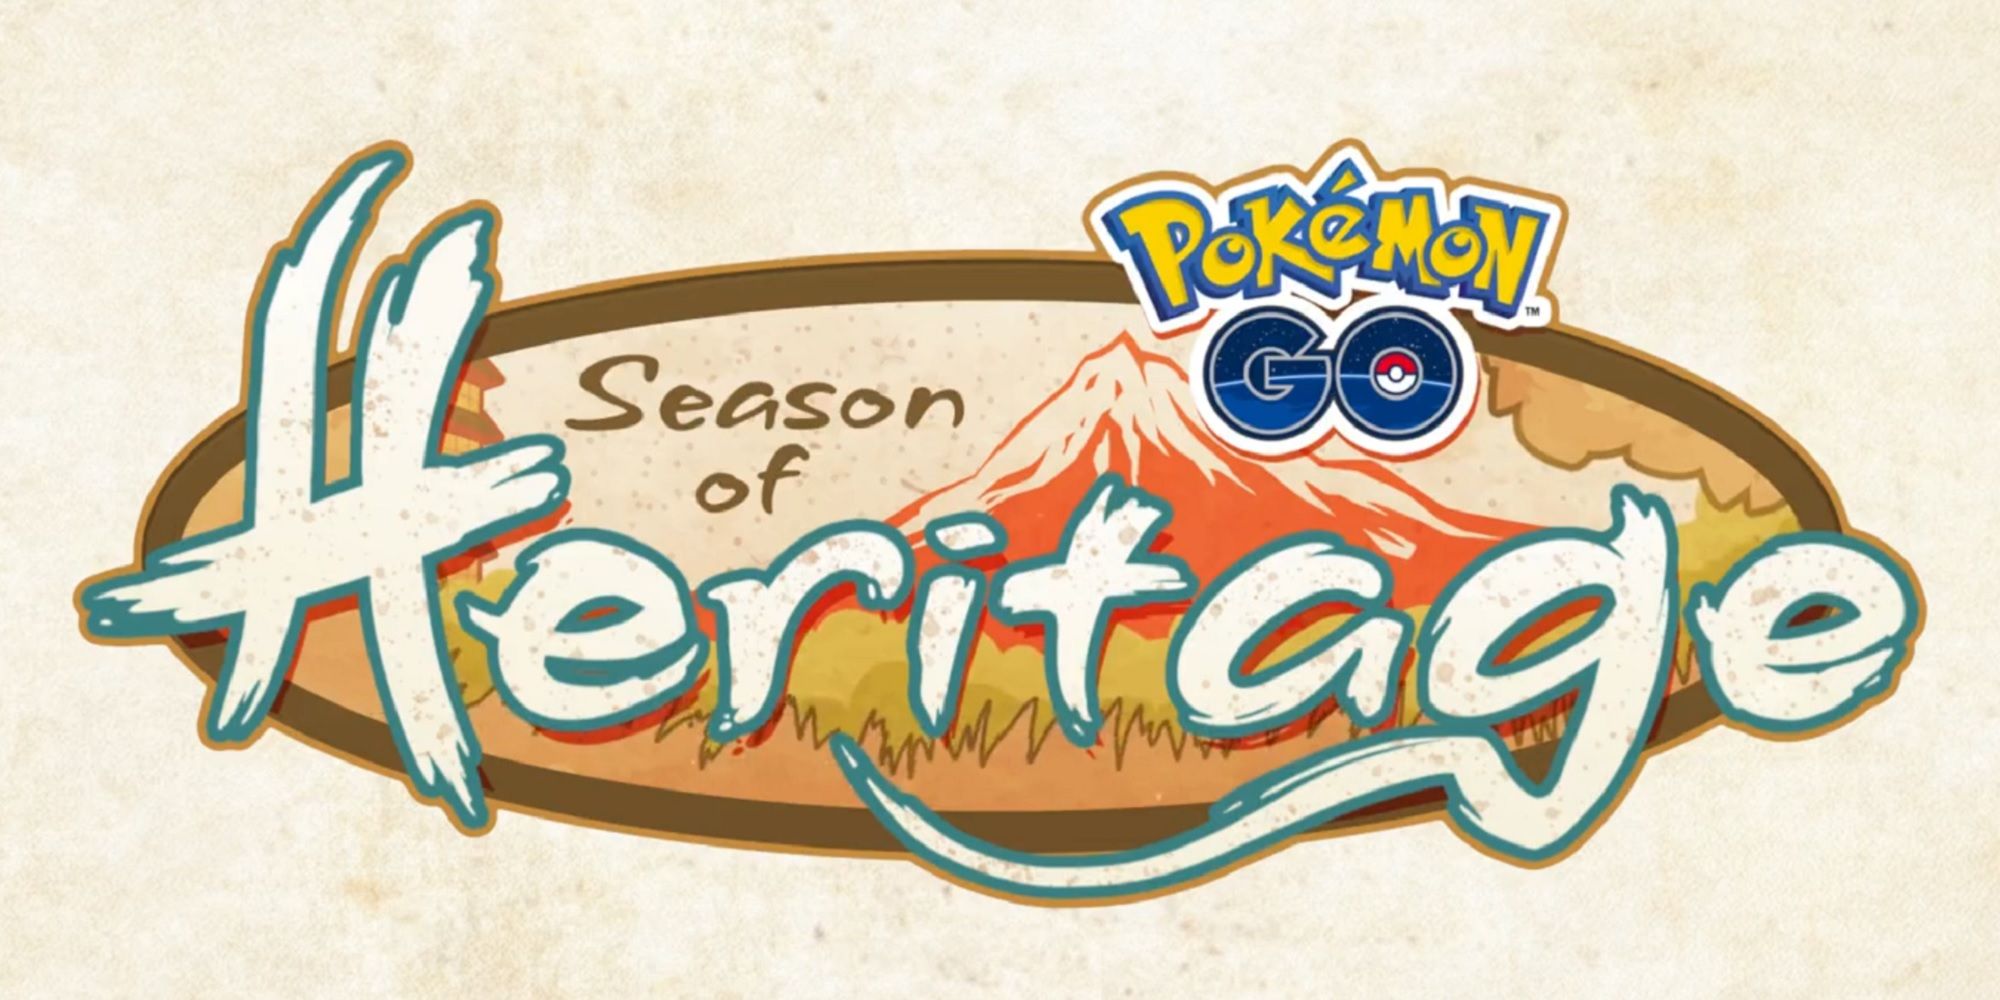 Pokemon Gos Season of Heritage Has A Chance To Right The Game’s Wrongs